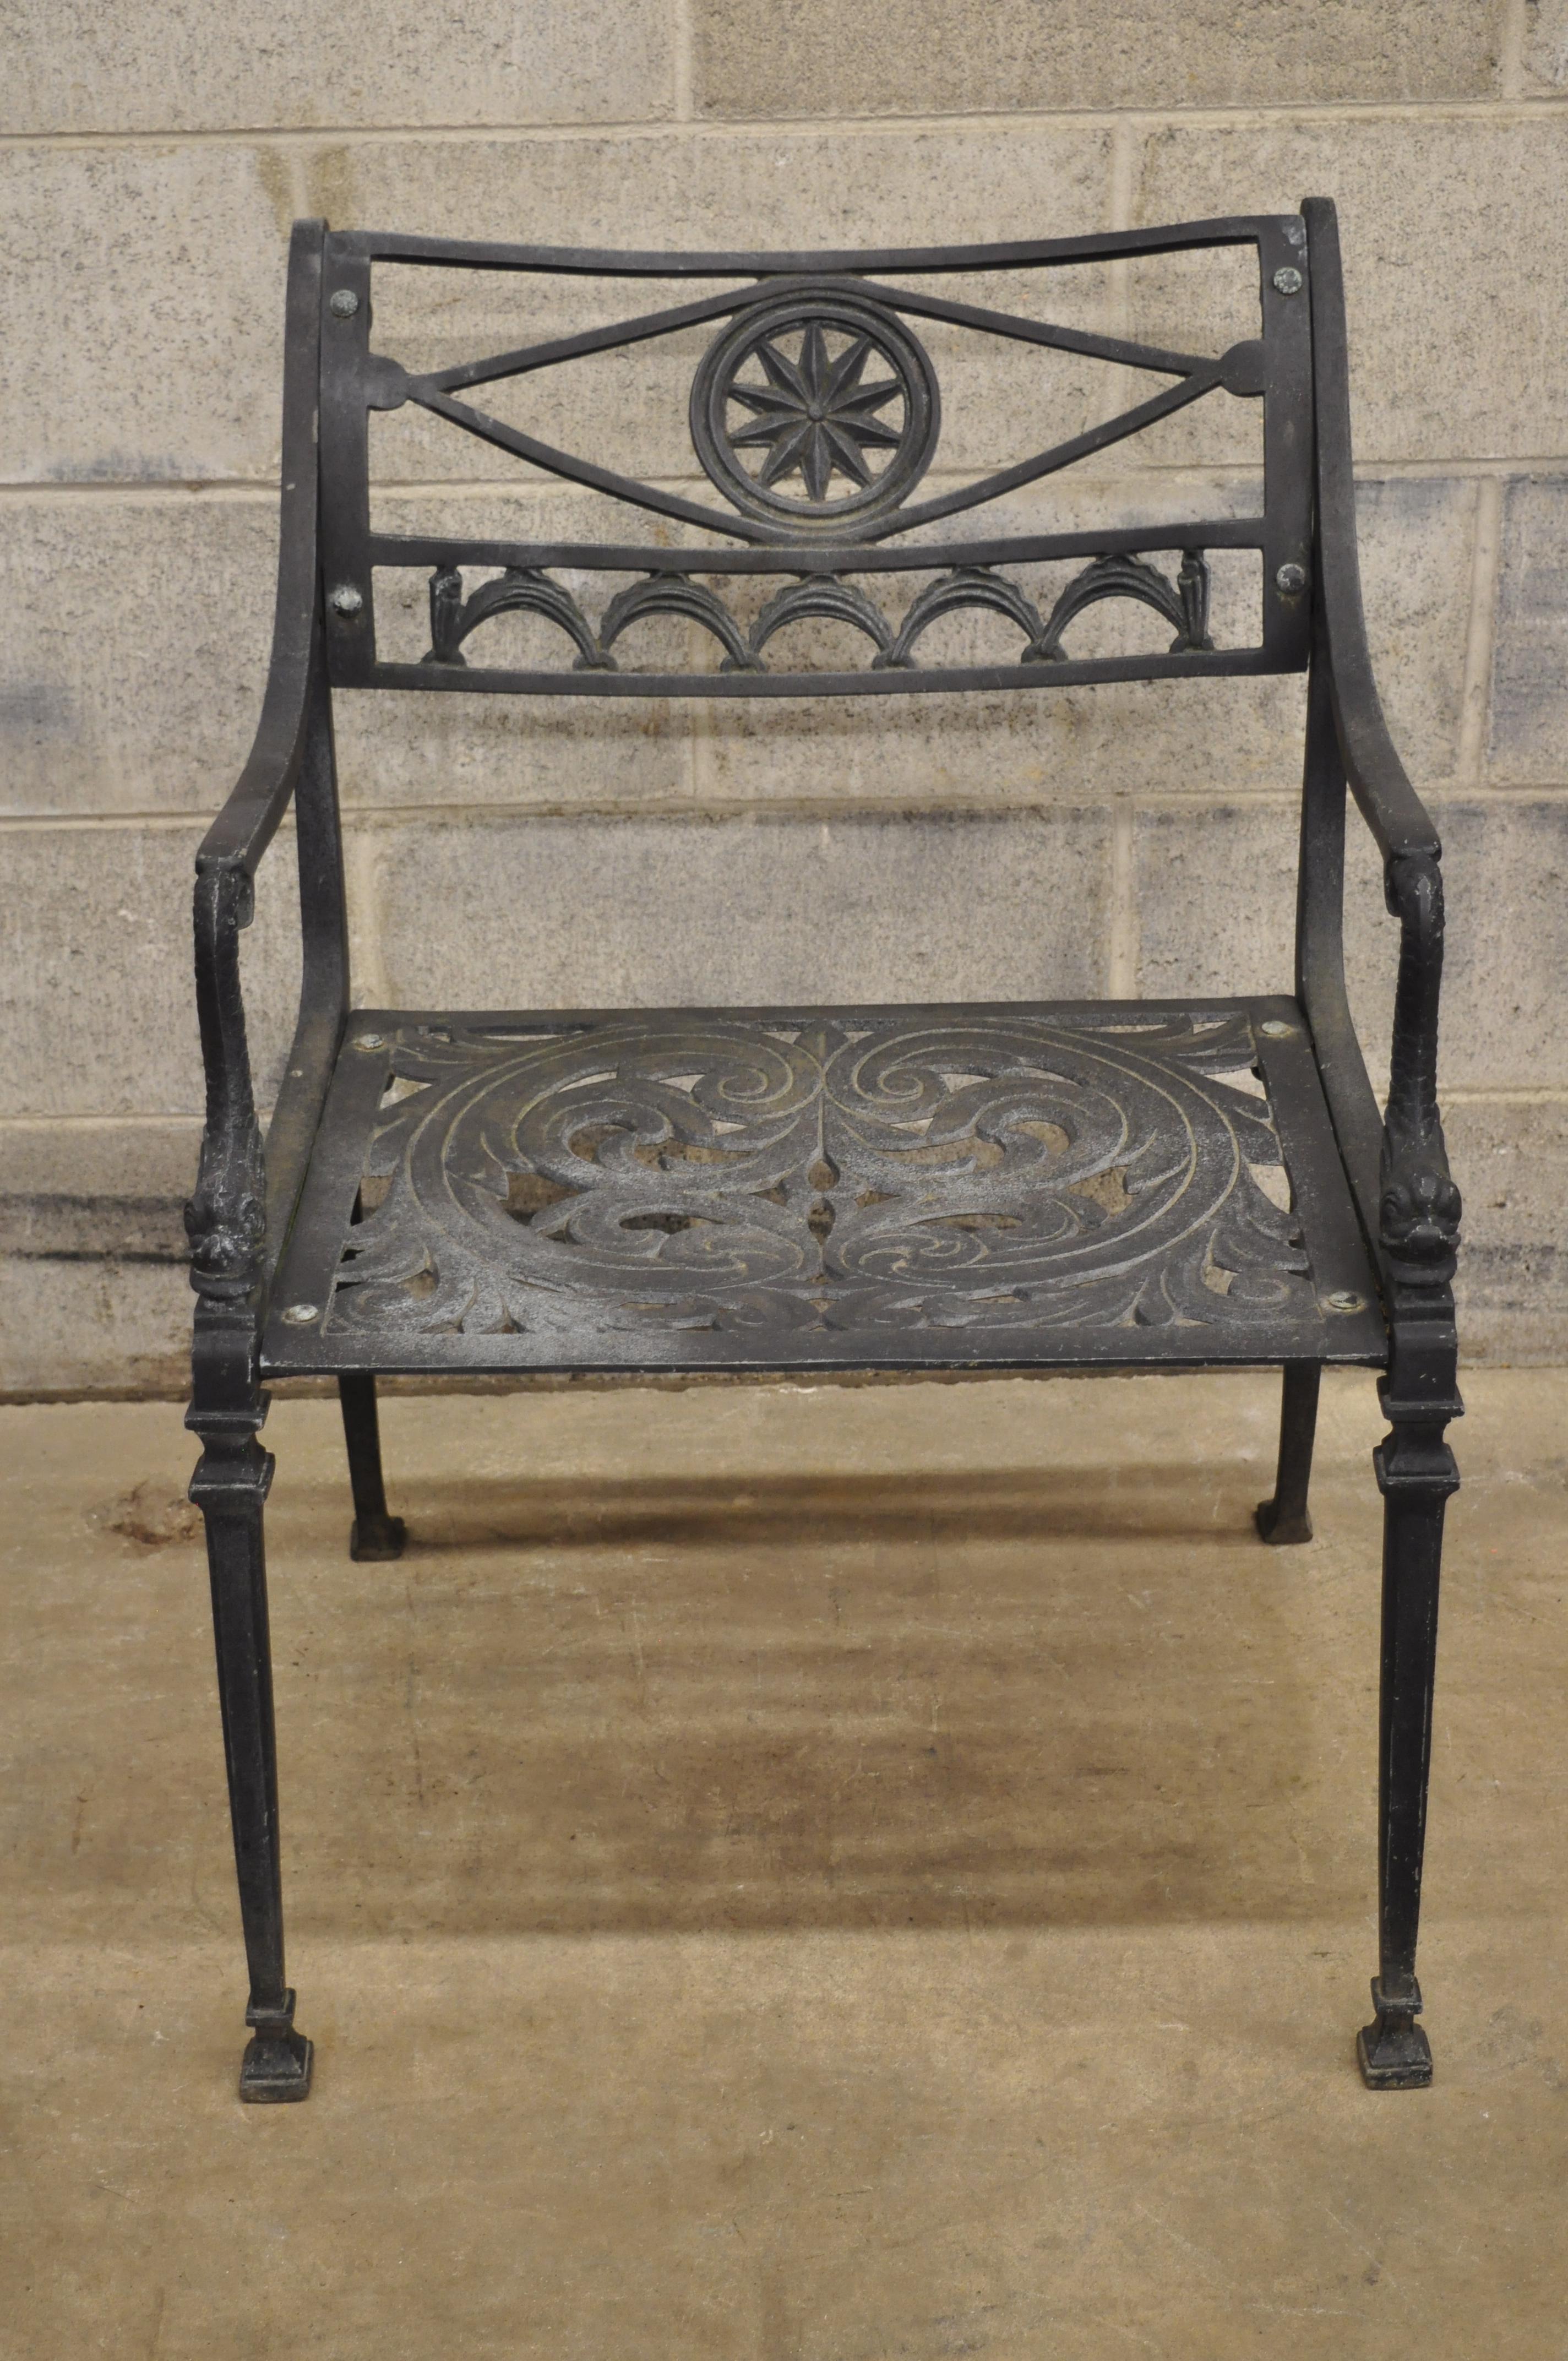 Italian neoclassical style cast aluminum swan patio armchair attributed to Molla. Listing features heavy cast aluminum construction, pierced filigree design seat, tapered legs, swan accents, quality craftsmanship, great style and form. Maker